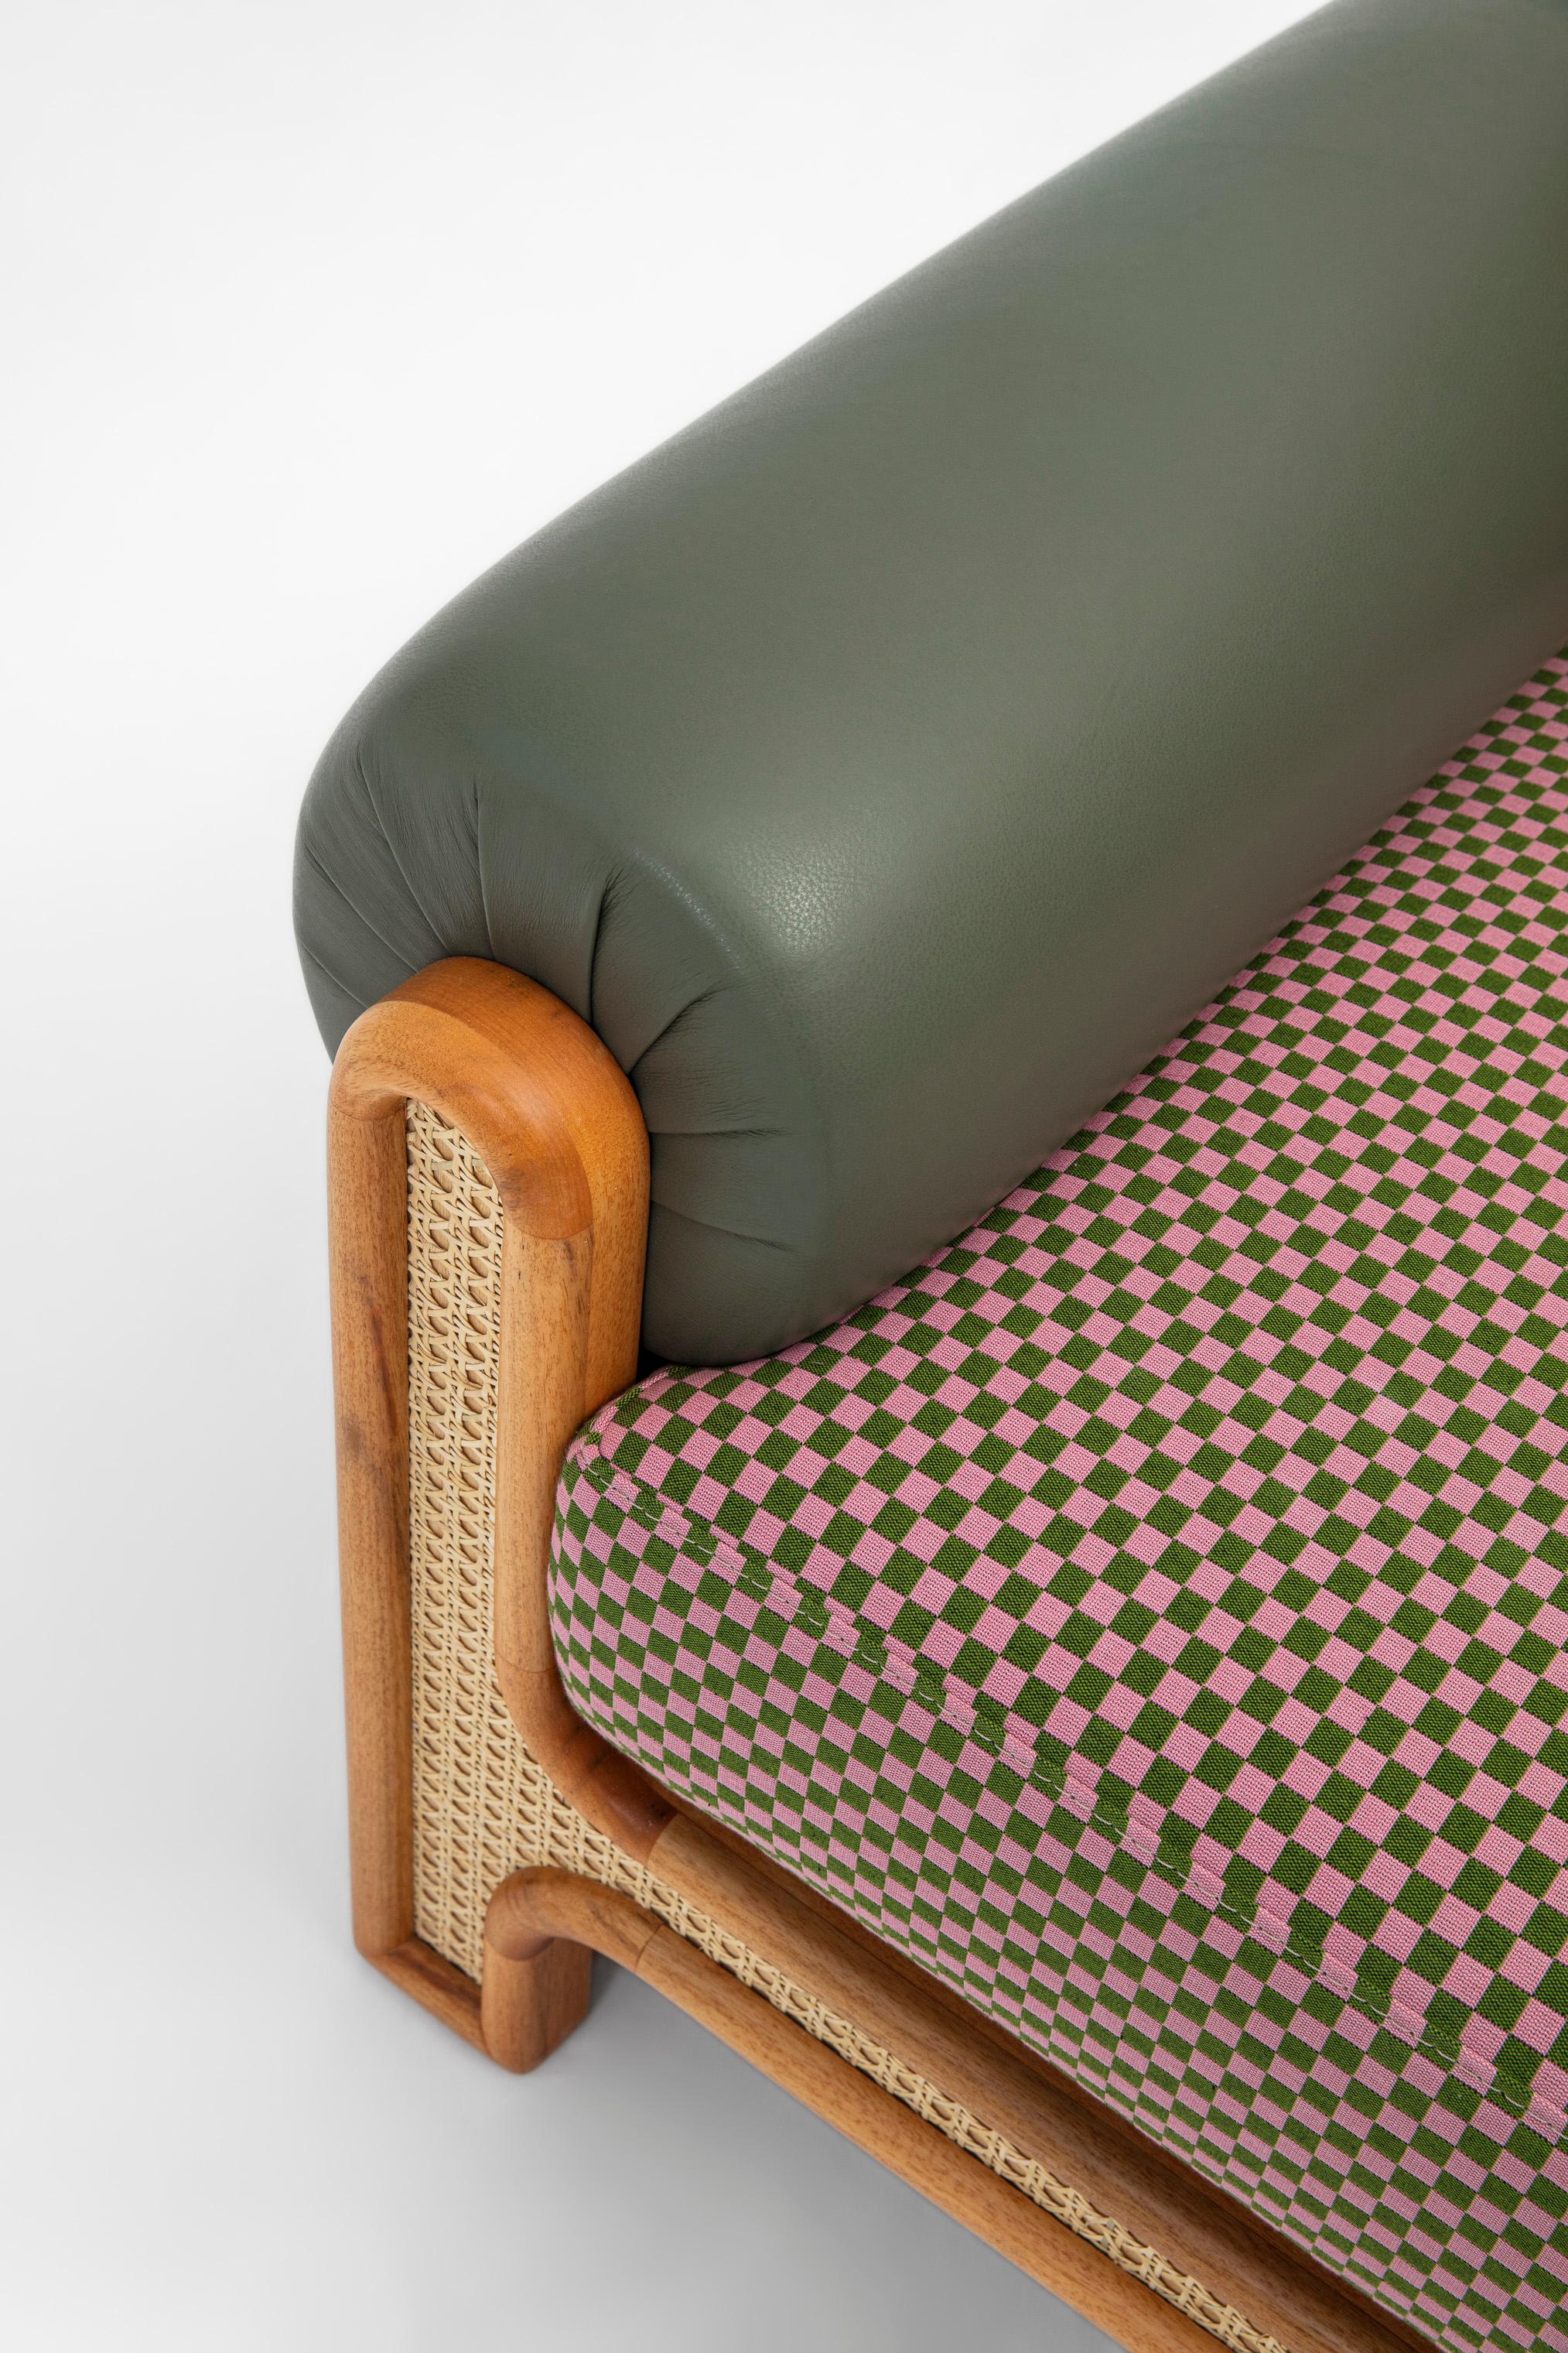 Caning N-Gene Armchair with Cherry Checker Fabric and Olive Leather For Sale